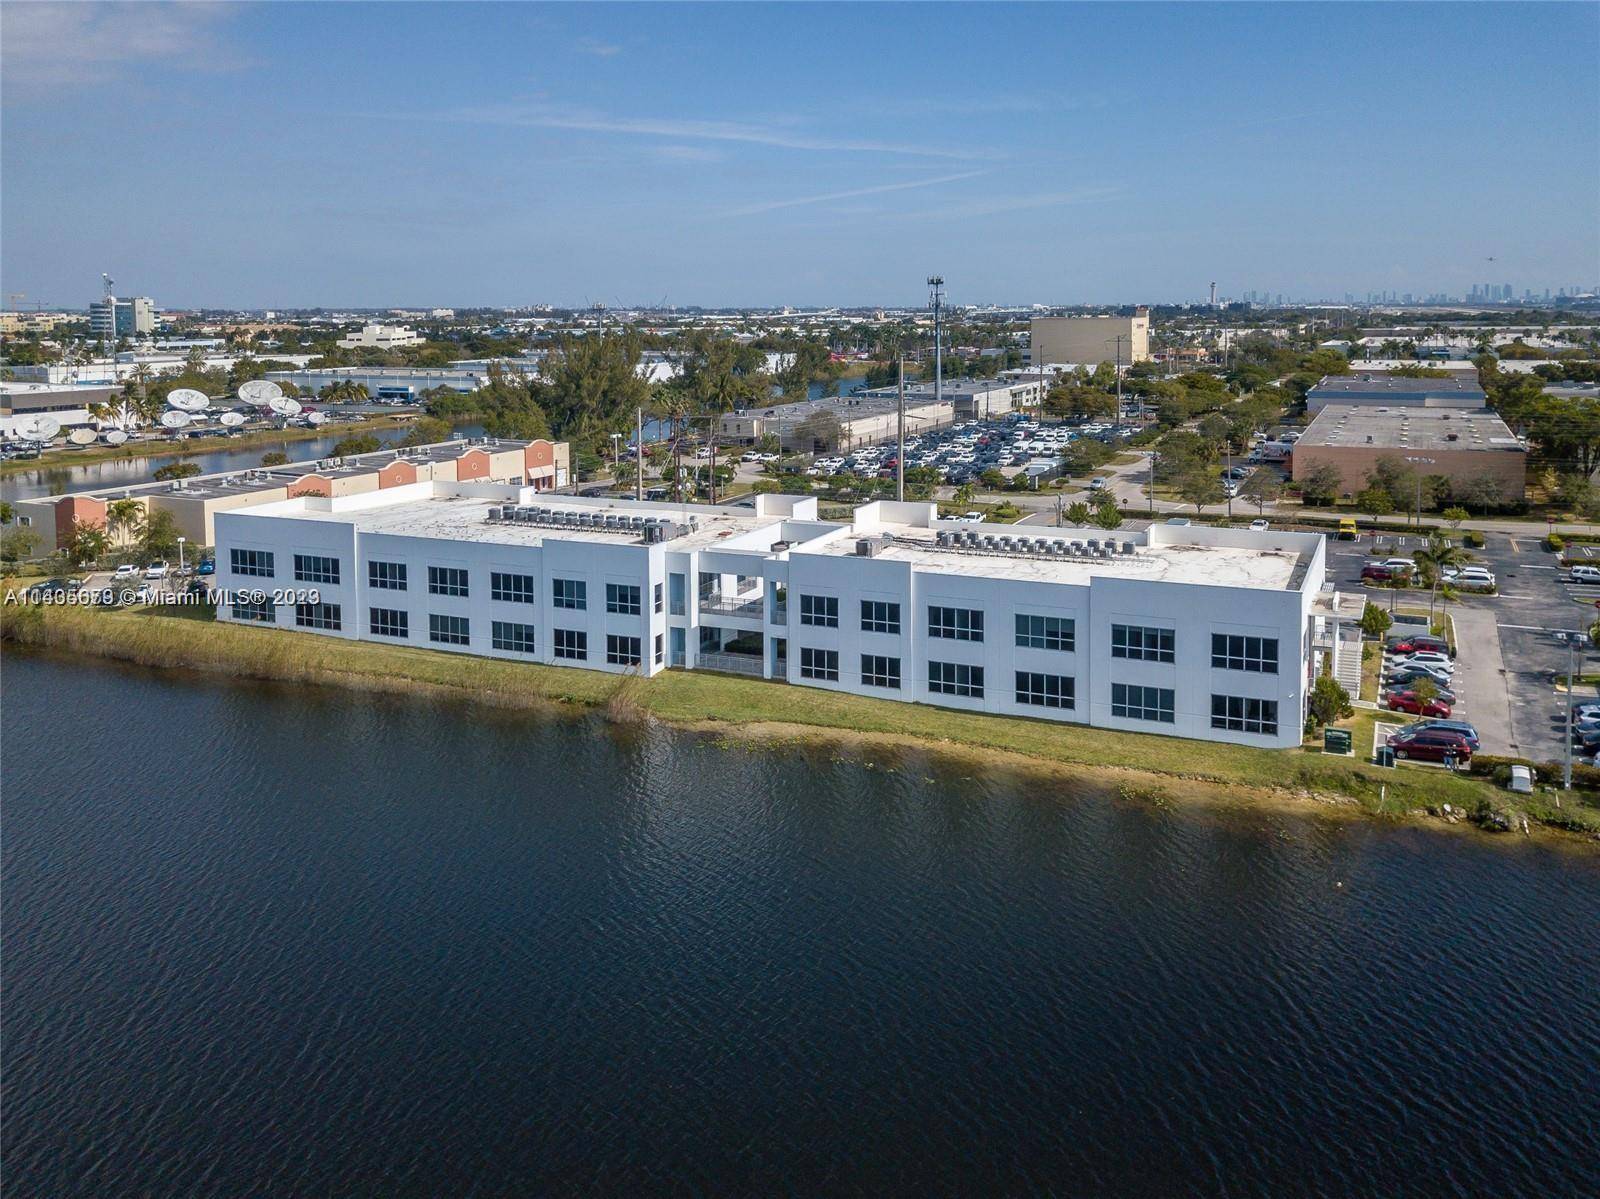 Spectacular modern commercial office OF 1, 030SQFT with water view in desired RIVIERA POINT BUSINESS CENTER AT DORAL.